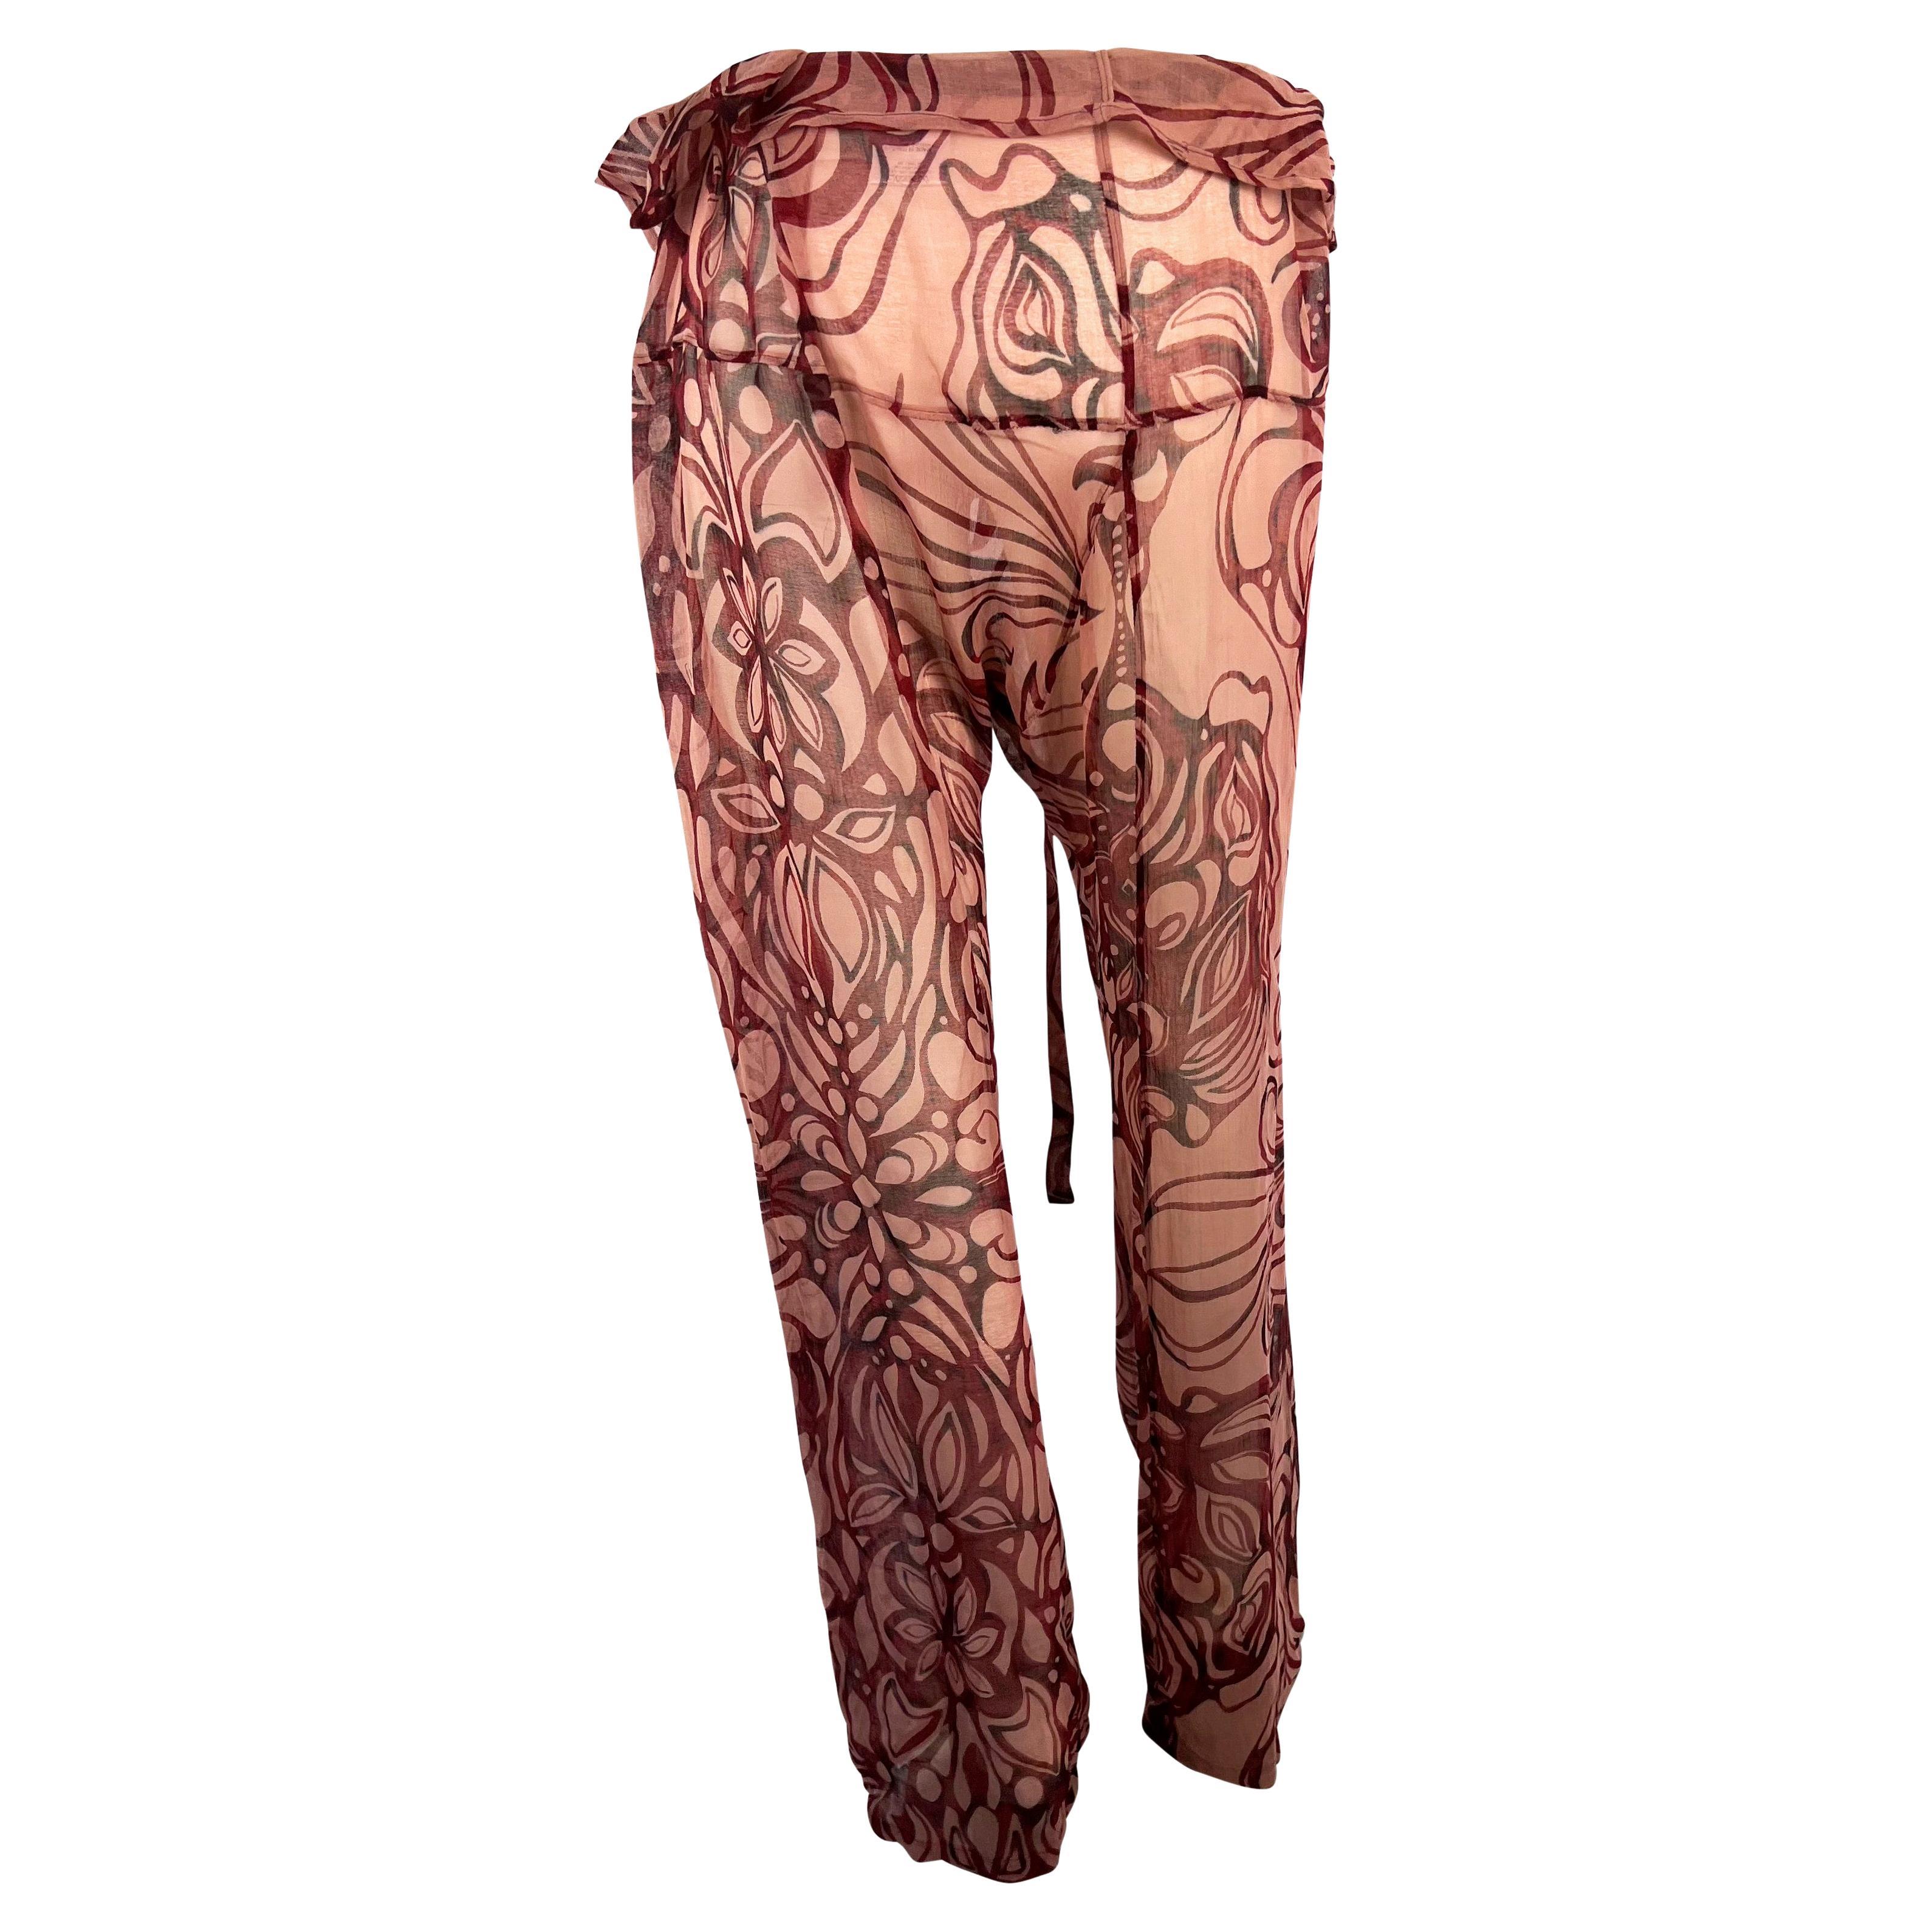 S/S 2002 Gucci by Tom Ford Sheer Floral Tattoo Beach Coverup Pant Set NWT For Sale 2